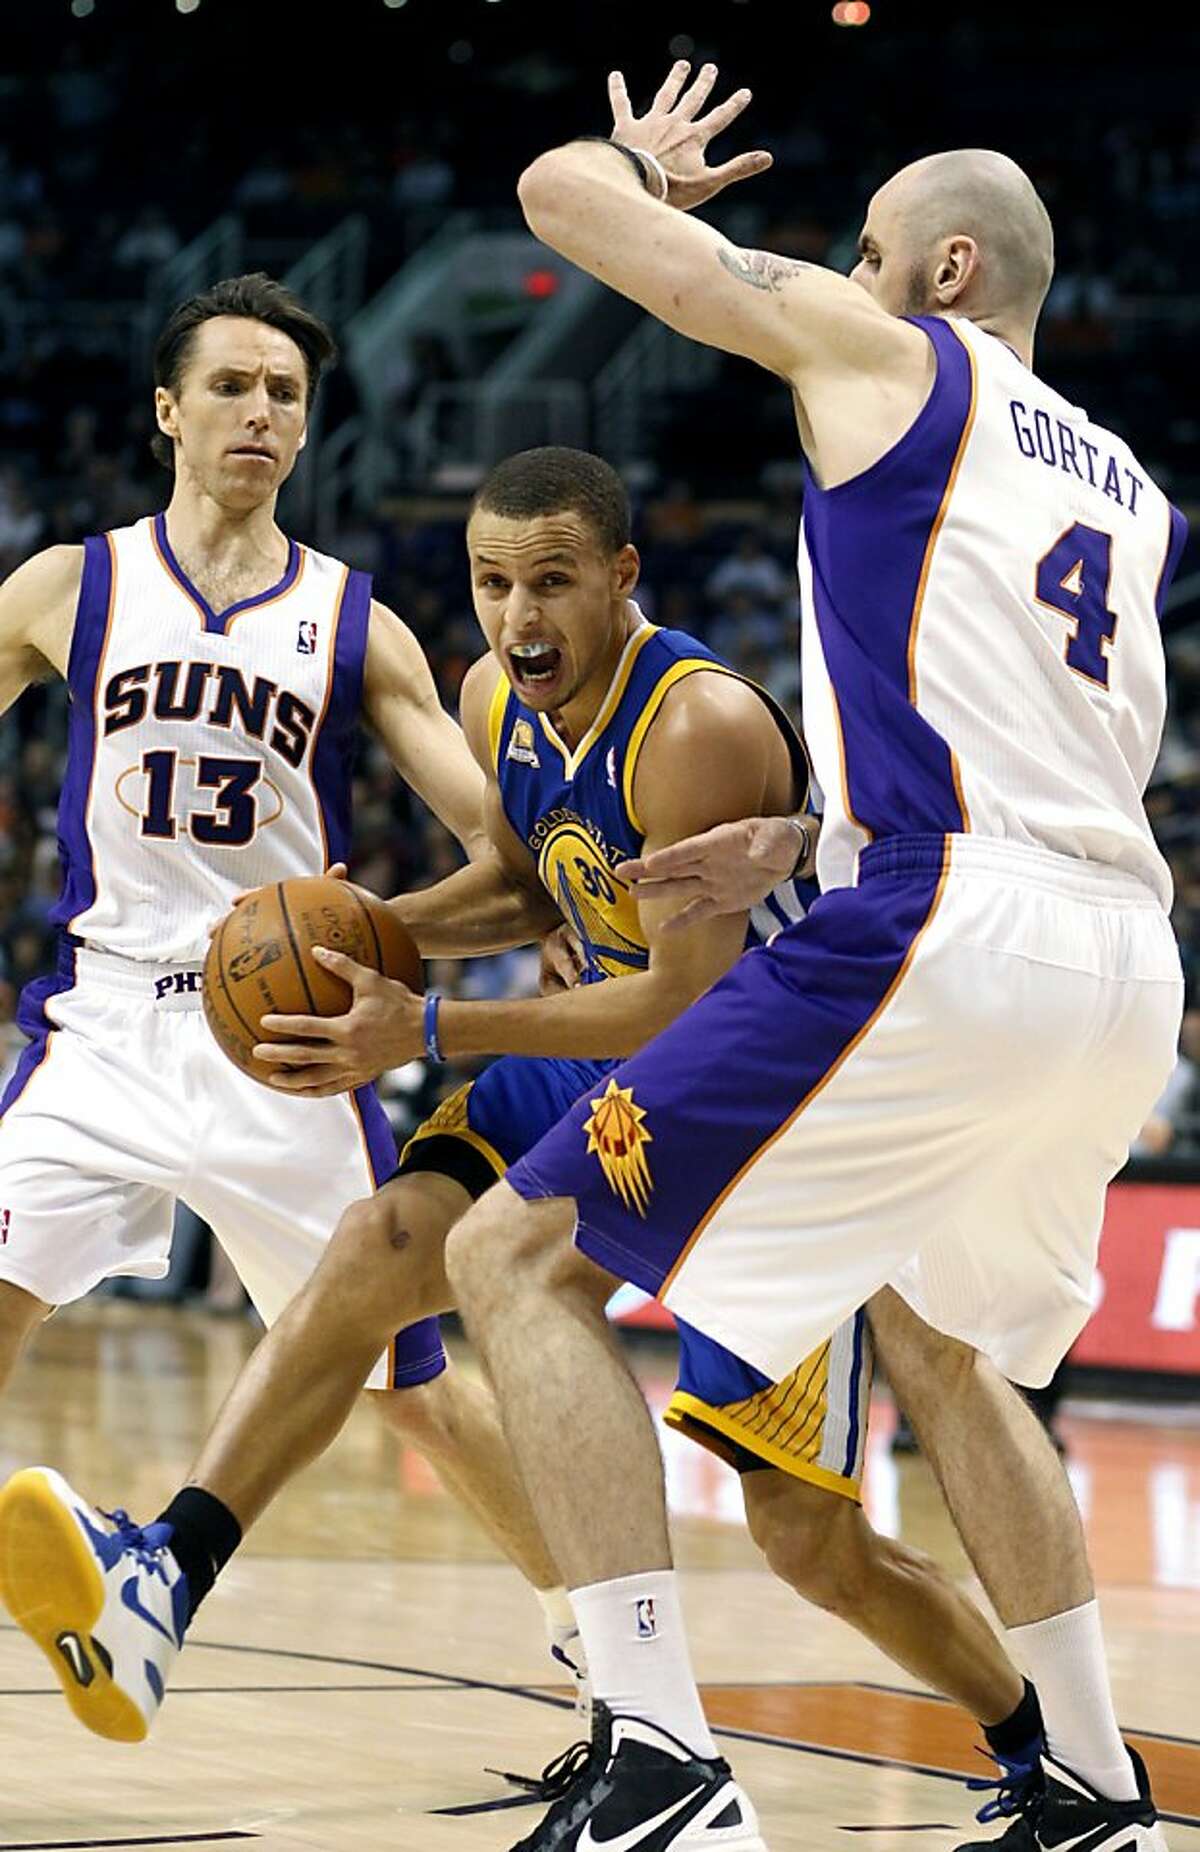 Golden State Warriors guard Stephen Curry, center, drives to the basket between Phoenix Suns guard Steve Nash, left, and center Marcin Gortat, right, of Poland, in the first quarter of an NBA basketball game Wednesday, Feb. 22, 2012, in Phoenix.